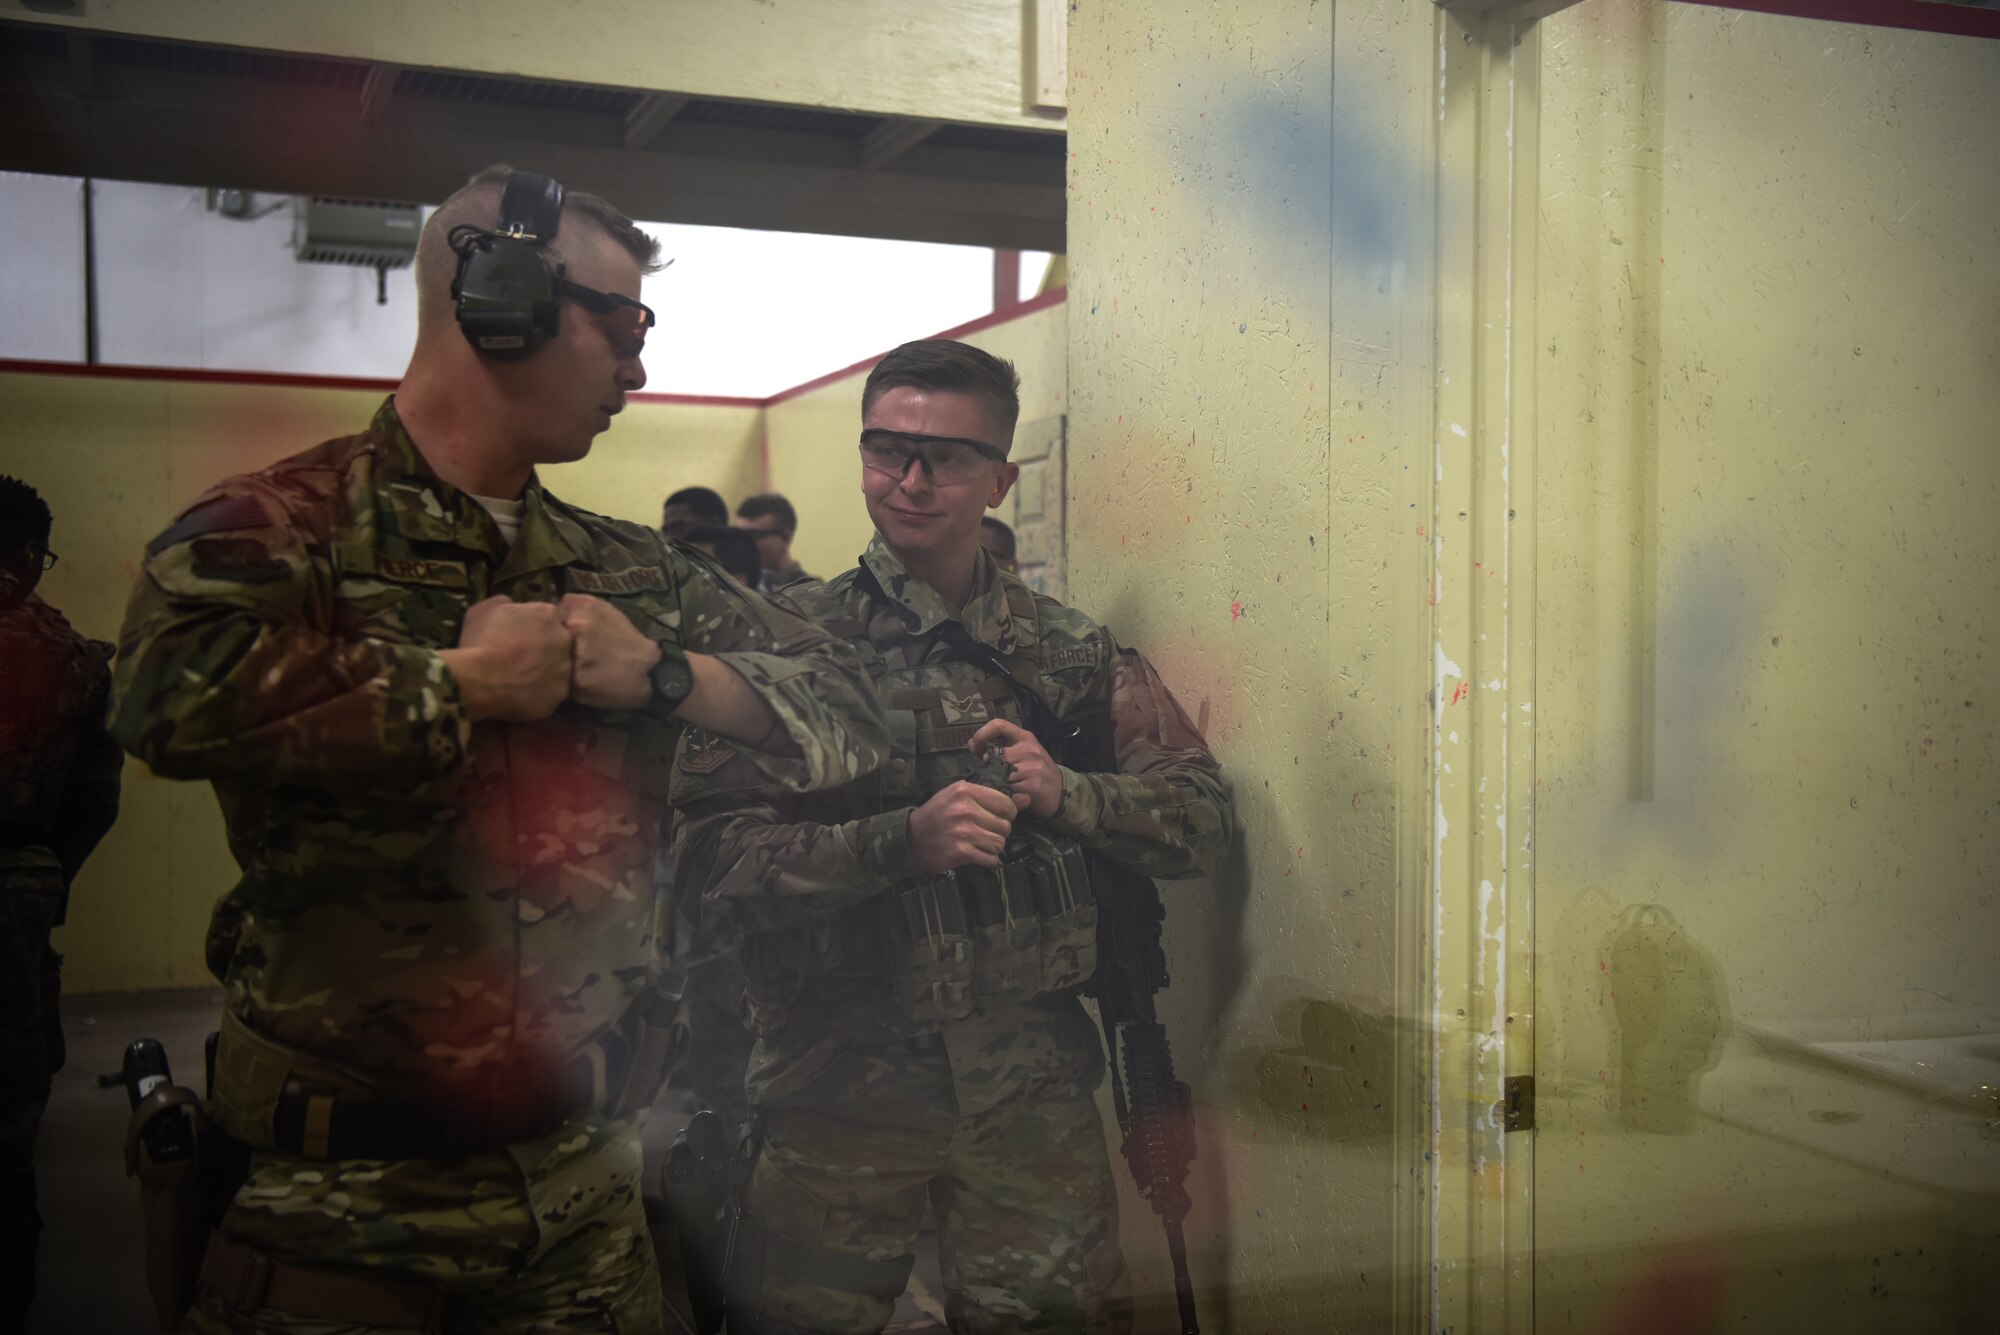 An Airman receives a demonstration on the proper use of an M84 flashbang during a response force tactical course Mar. 27, 2019, at the 90th Ground Combat Training Squadron, Camp Guernsey, Wyo. This distractionary device is a less than lethal ammunition grenade that helps to distract and cause chaos and allows security forces to make it through the door safely and gain control of a situation. (U.S. Air Force photo by Senior Airman Abbigayle Williams)